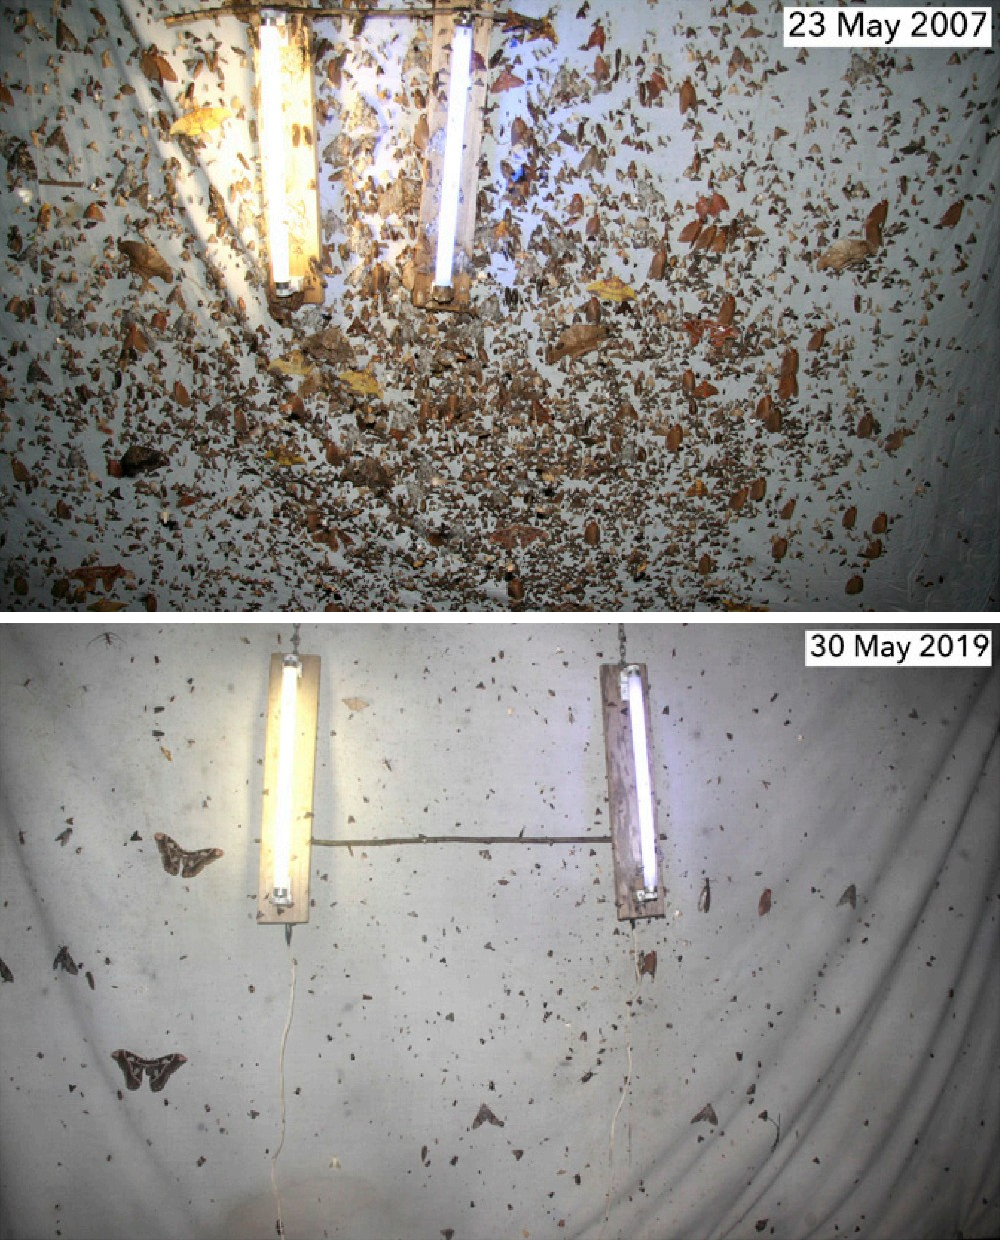 Two images, one from May 2007 and one from May 2019, show a decline in moths surveyed